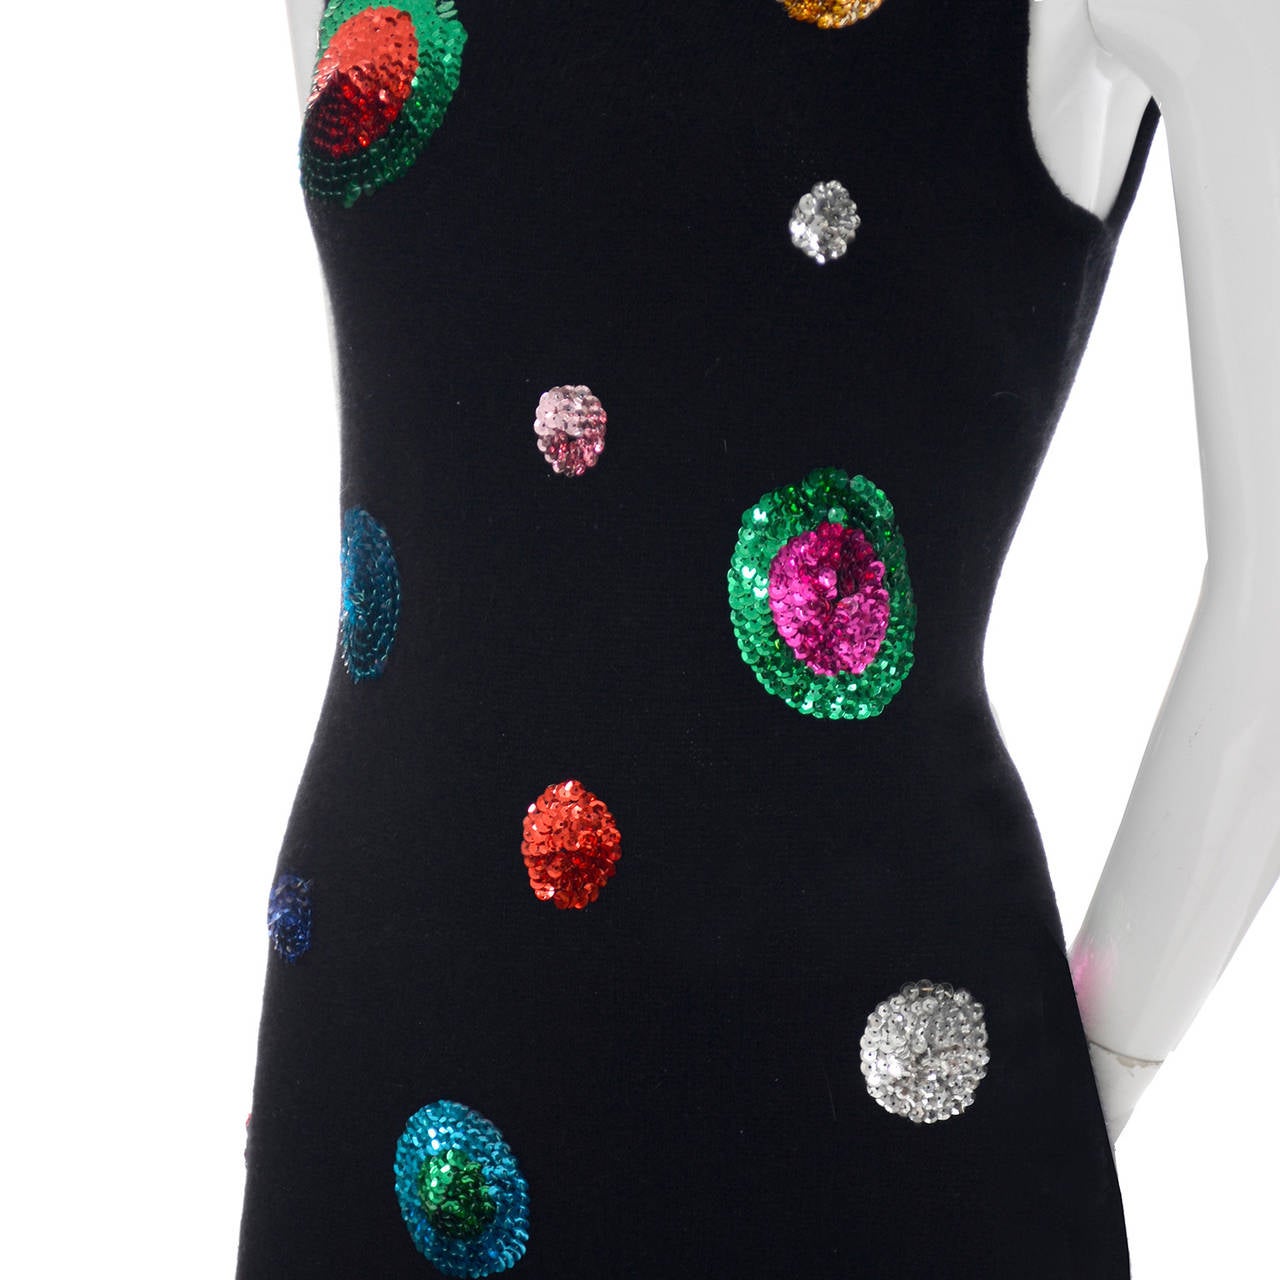 This vintage Adrienne Vittadini dress still has its original tags. The dress is black with beautiful multi colored sequin circles all over.  There is a back zipper and the dress is made of 75% lambswool, 15% angora and 10% nylon.  The dress